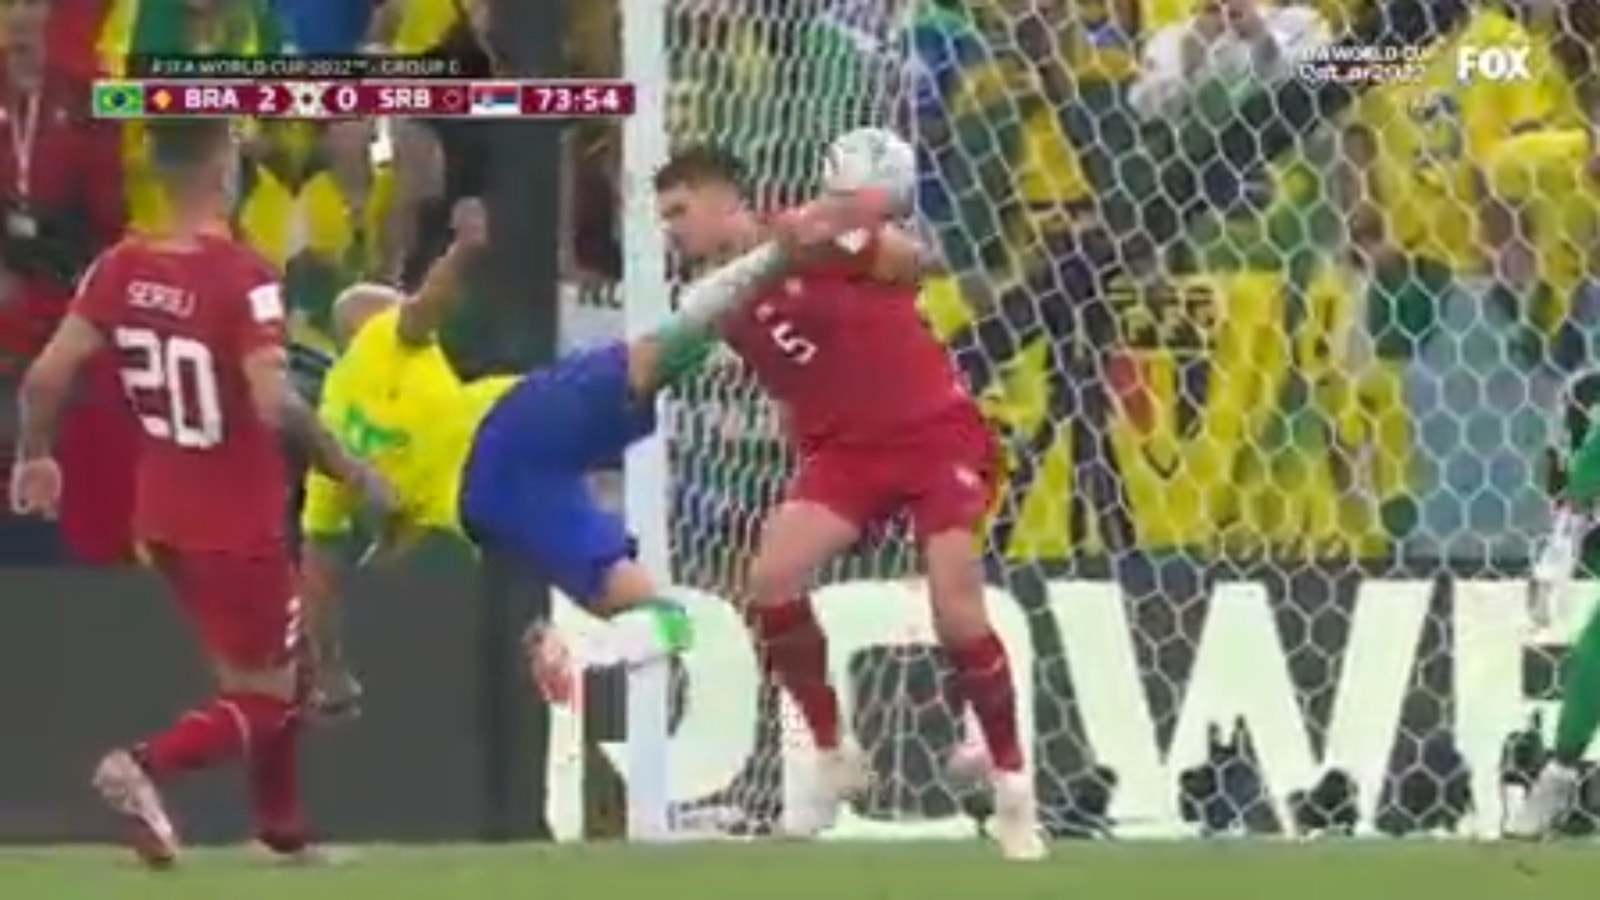 Richarlison gave Brazil a 2-0 lead with an acrobatic goal in the 73rd minute